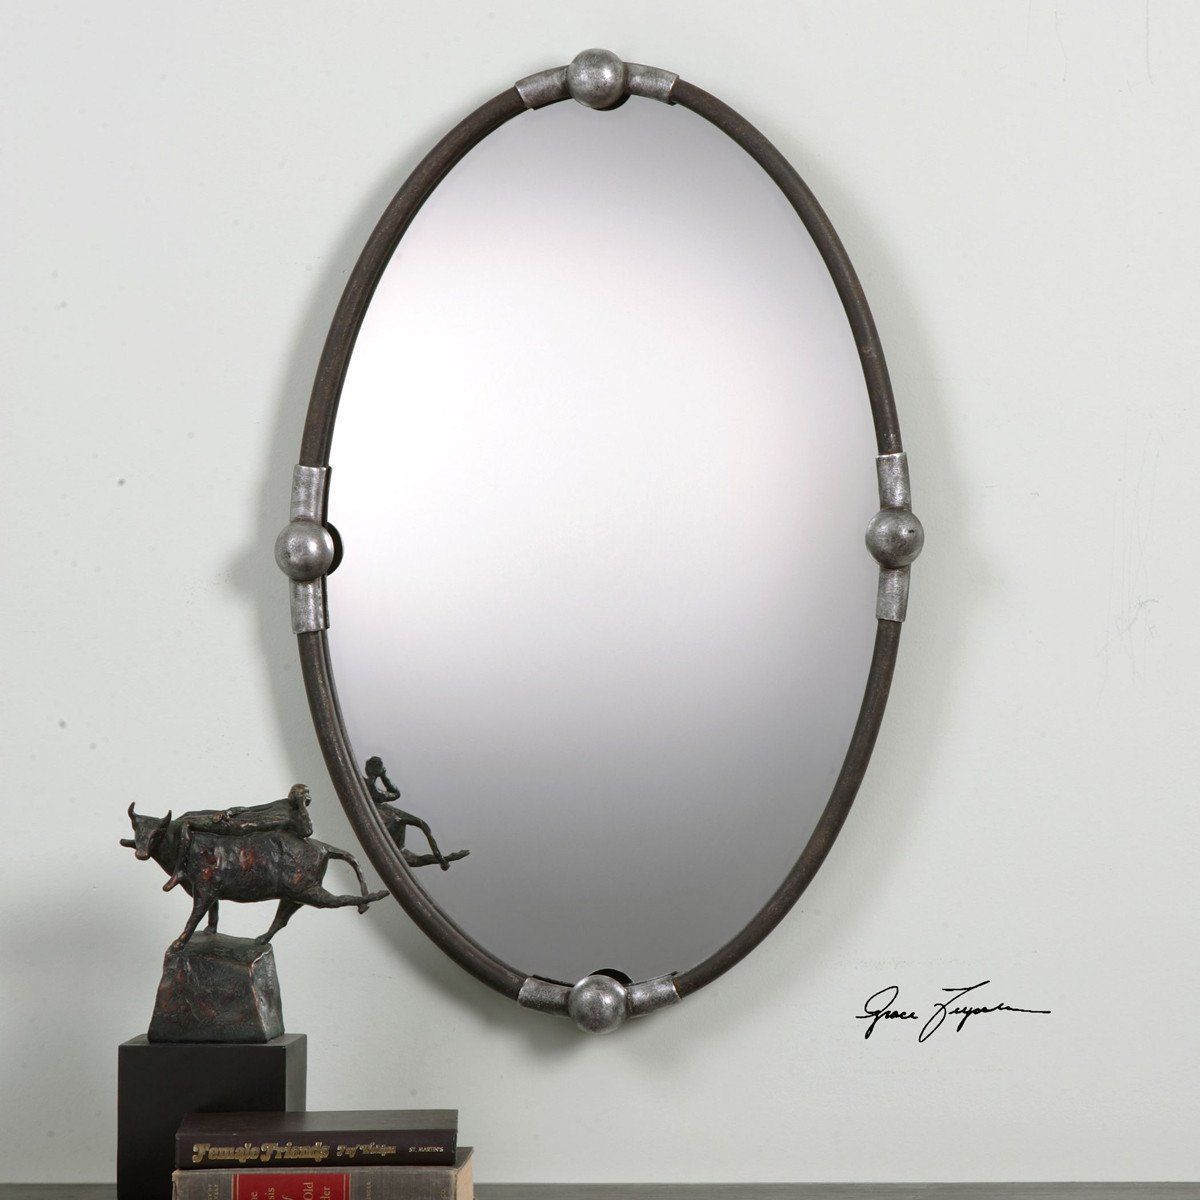 Carrick Black Oval Mirror | Oval Mirror, Oval Wall Mirror, Mirror Wall Throughout Black Oval Cut Wall Mirrors (View 5 of 15)